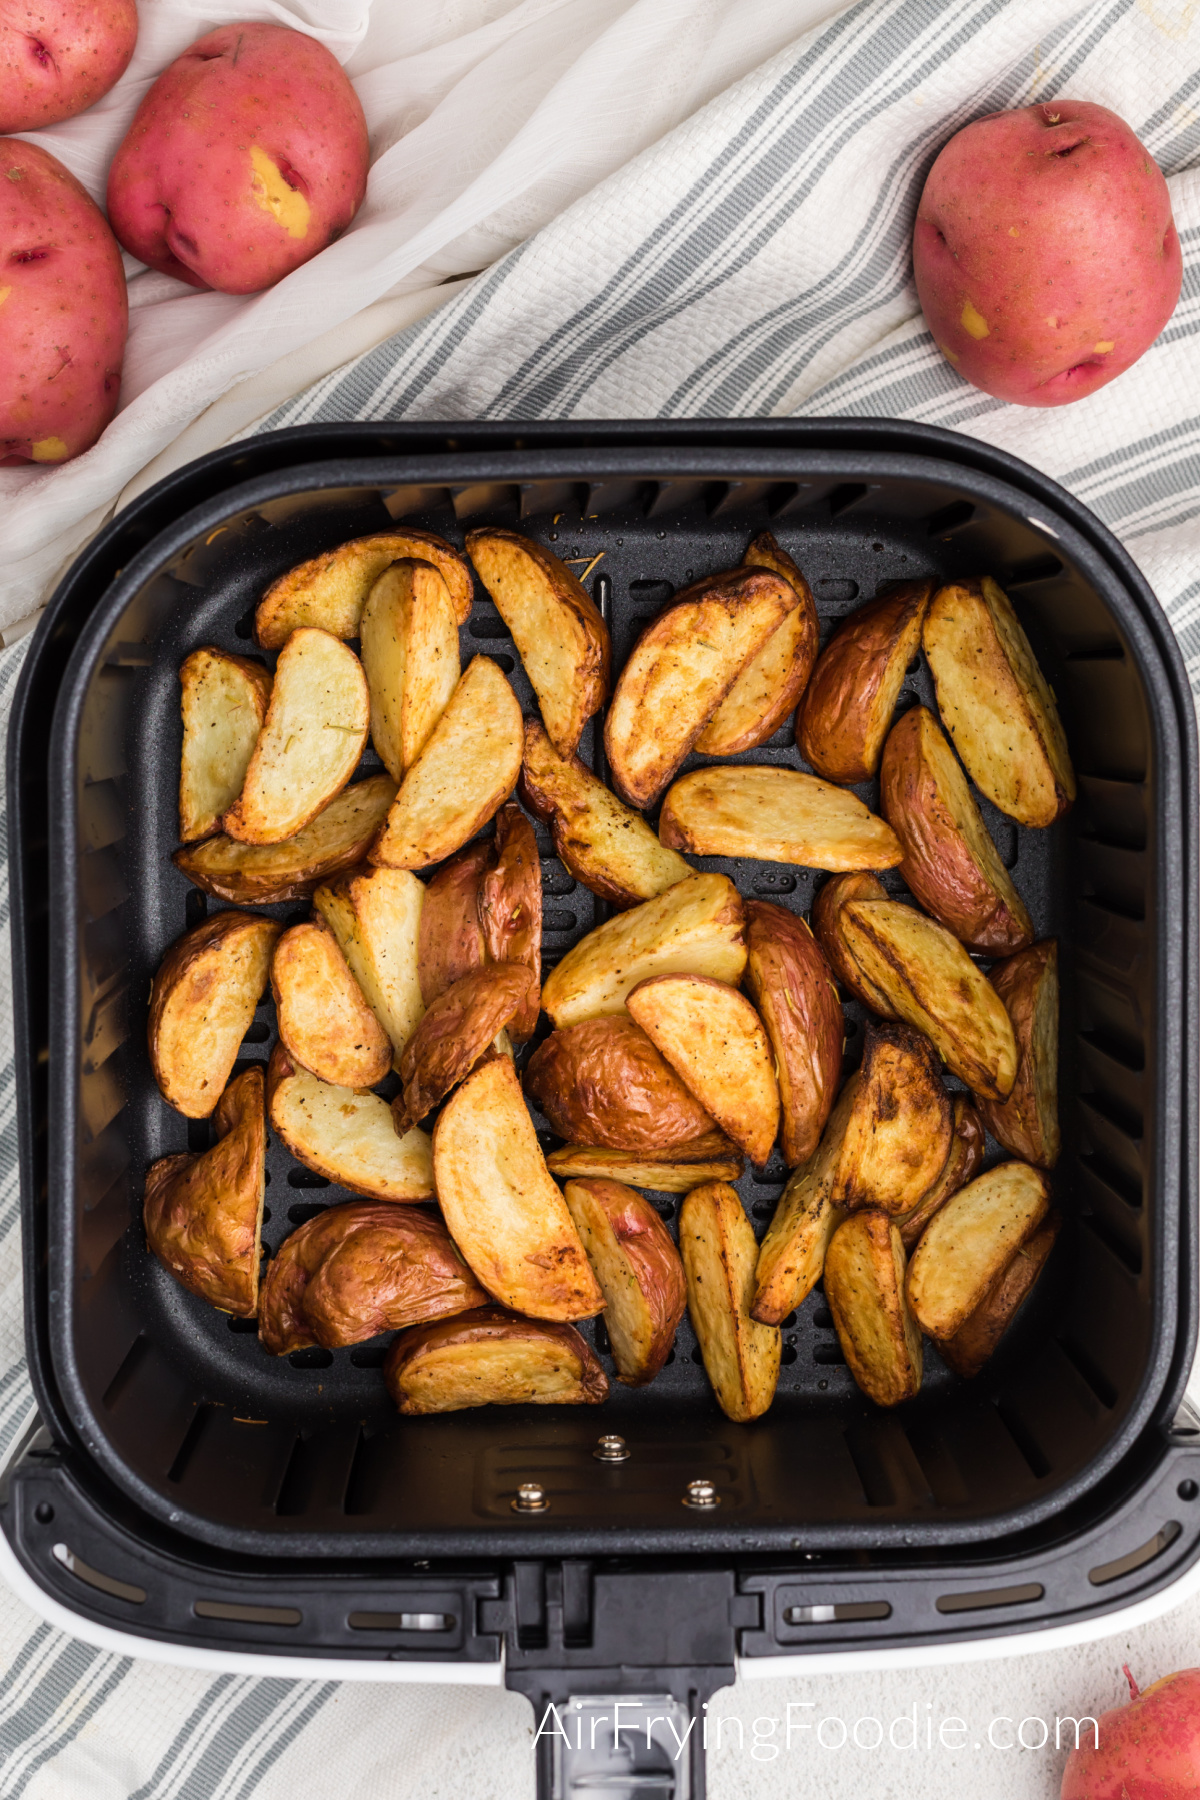 Seasoned golden brown red potatoes in the basket of the air fryer.